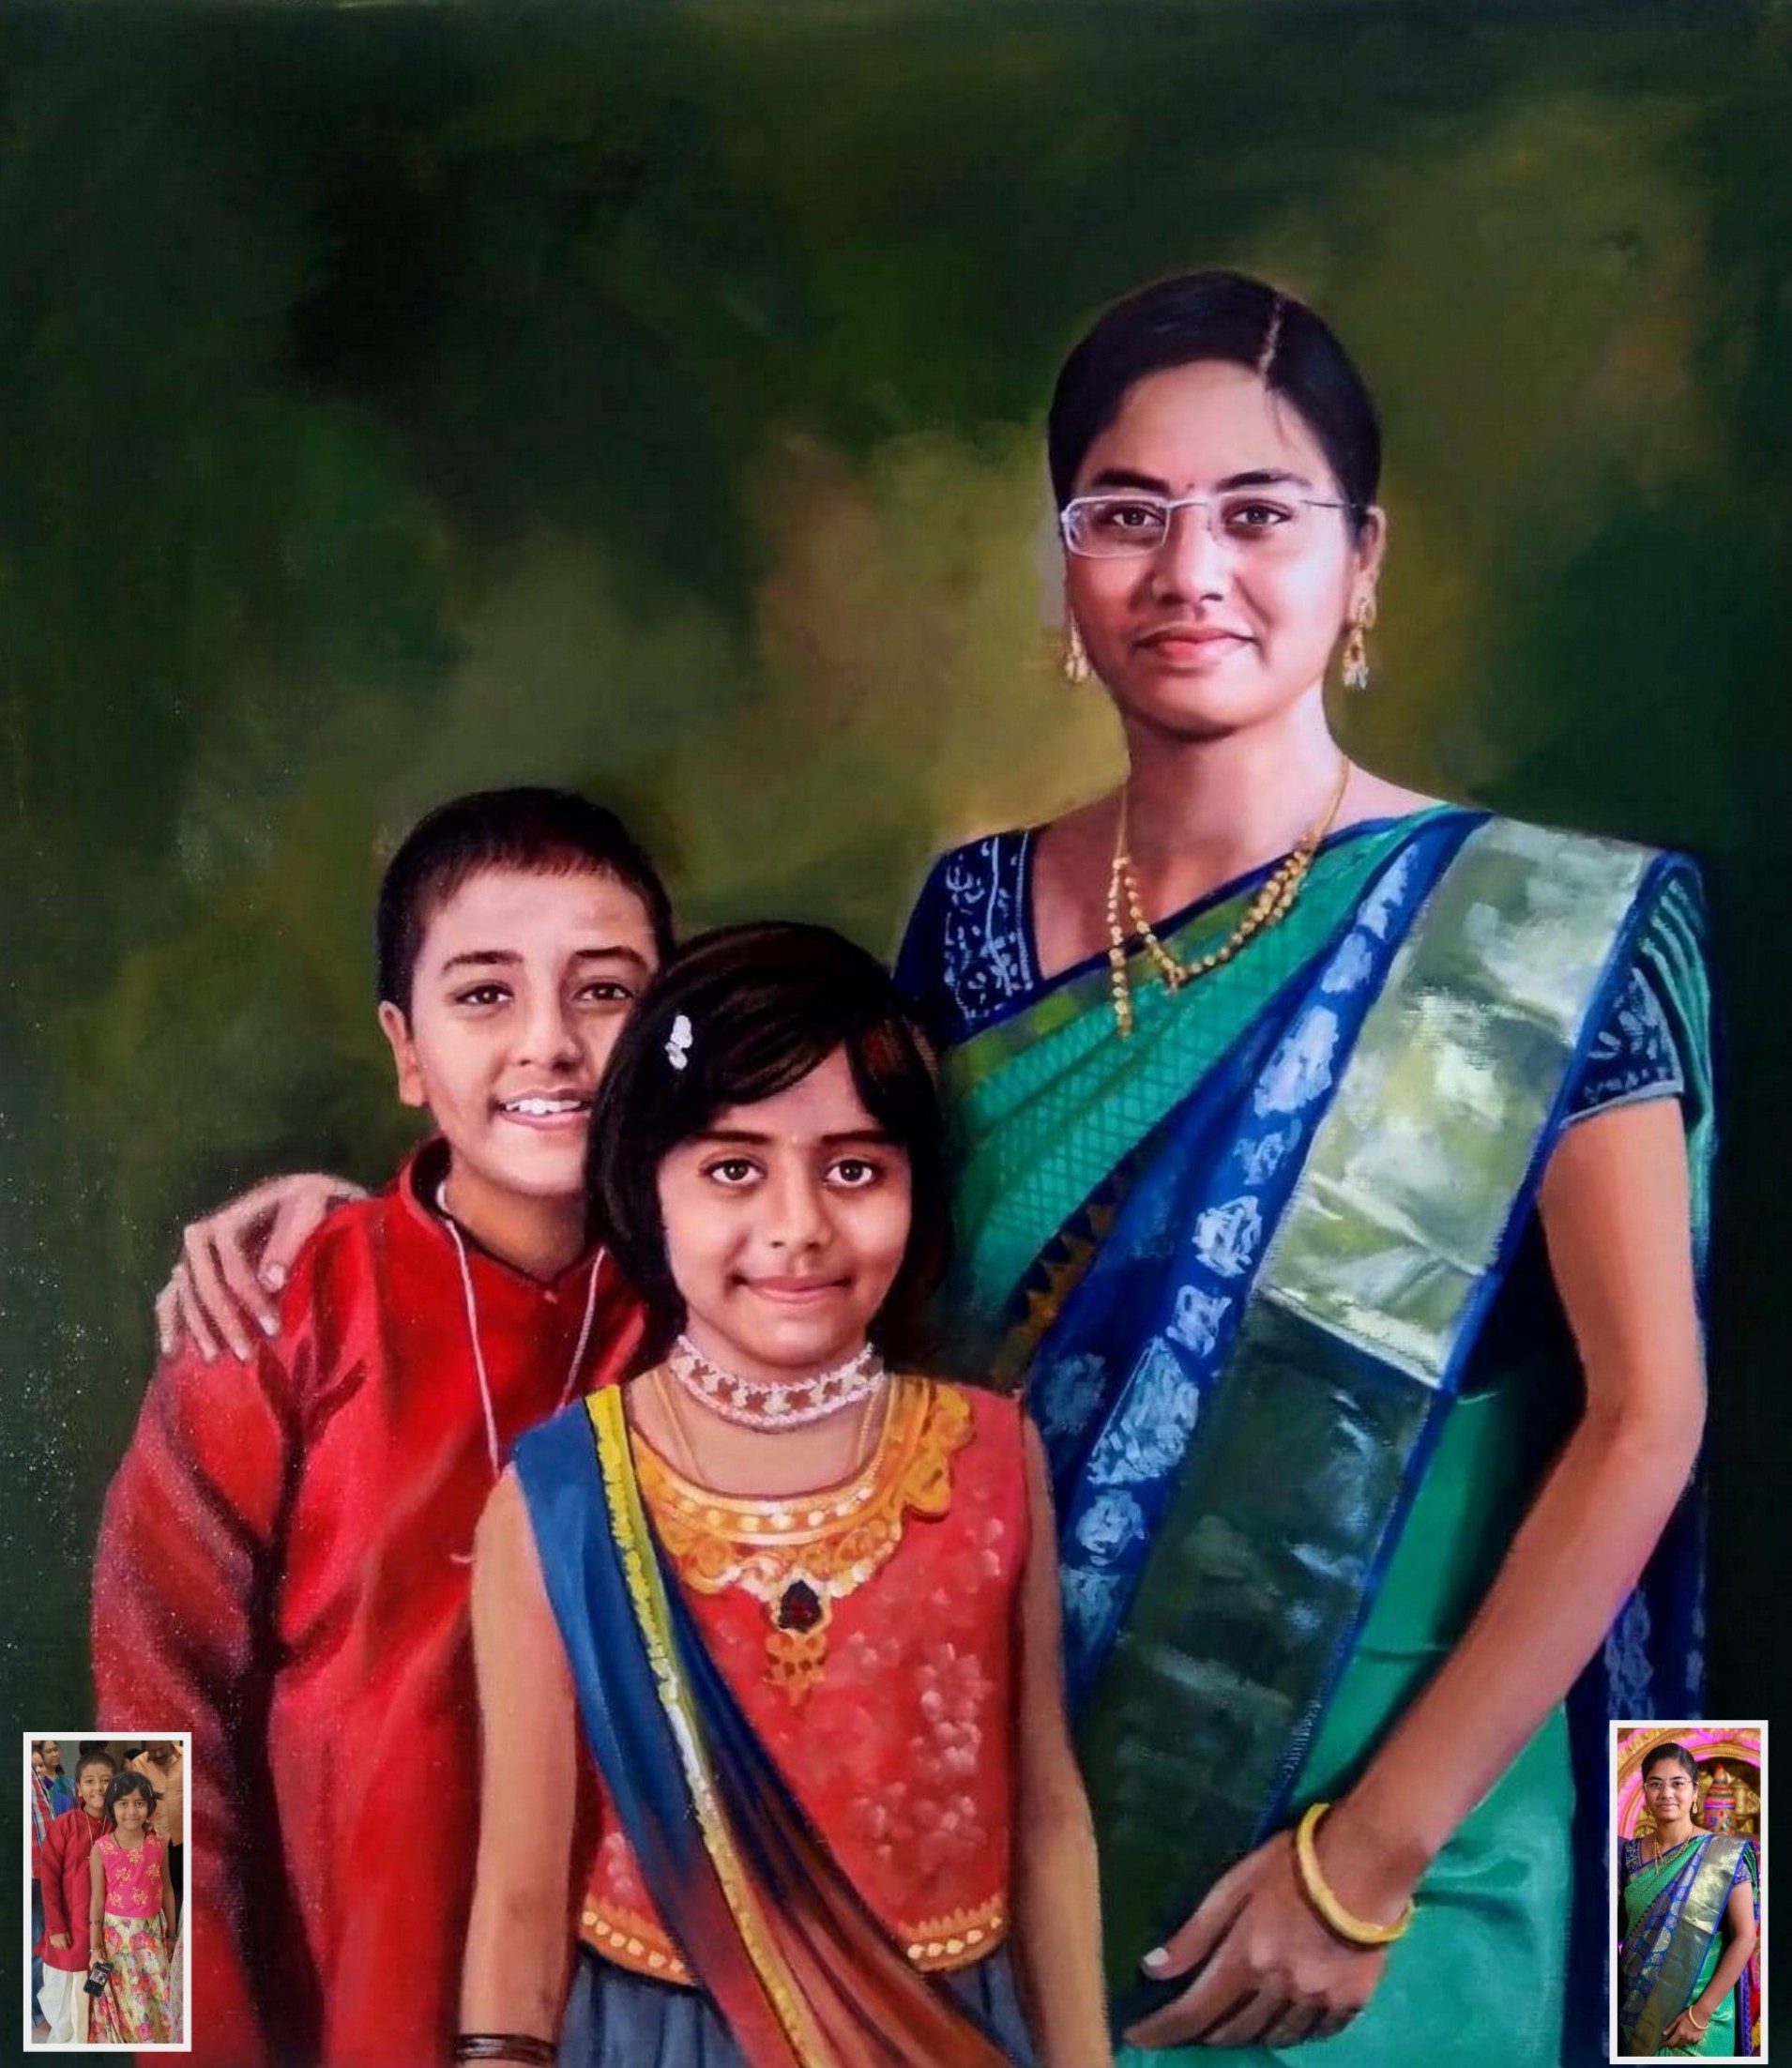 merged photo to oil painting, mom and children merged photo to painting, oil painting from photo